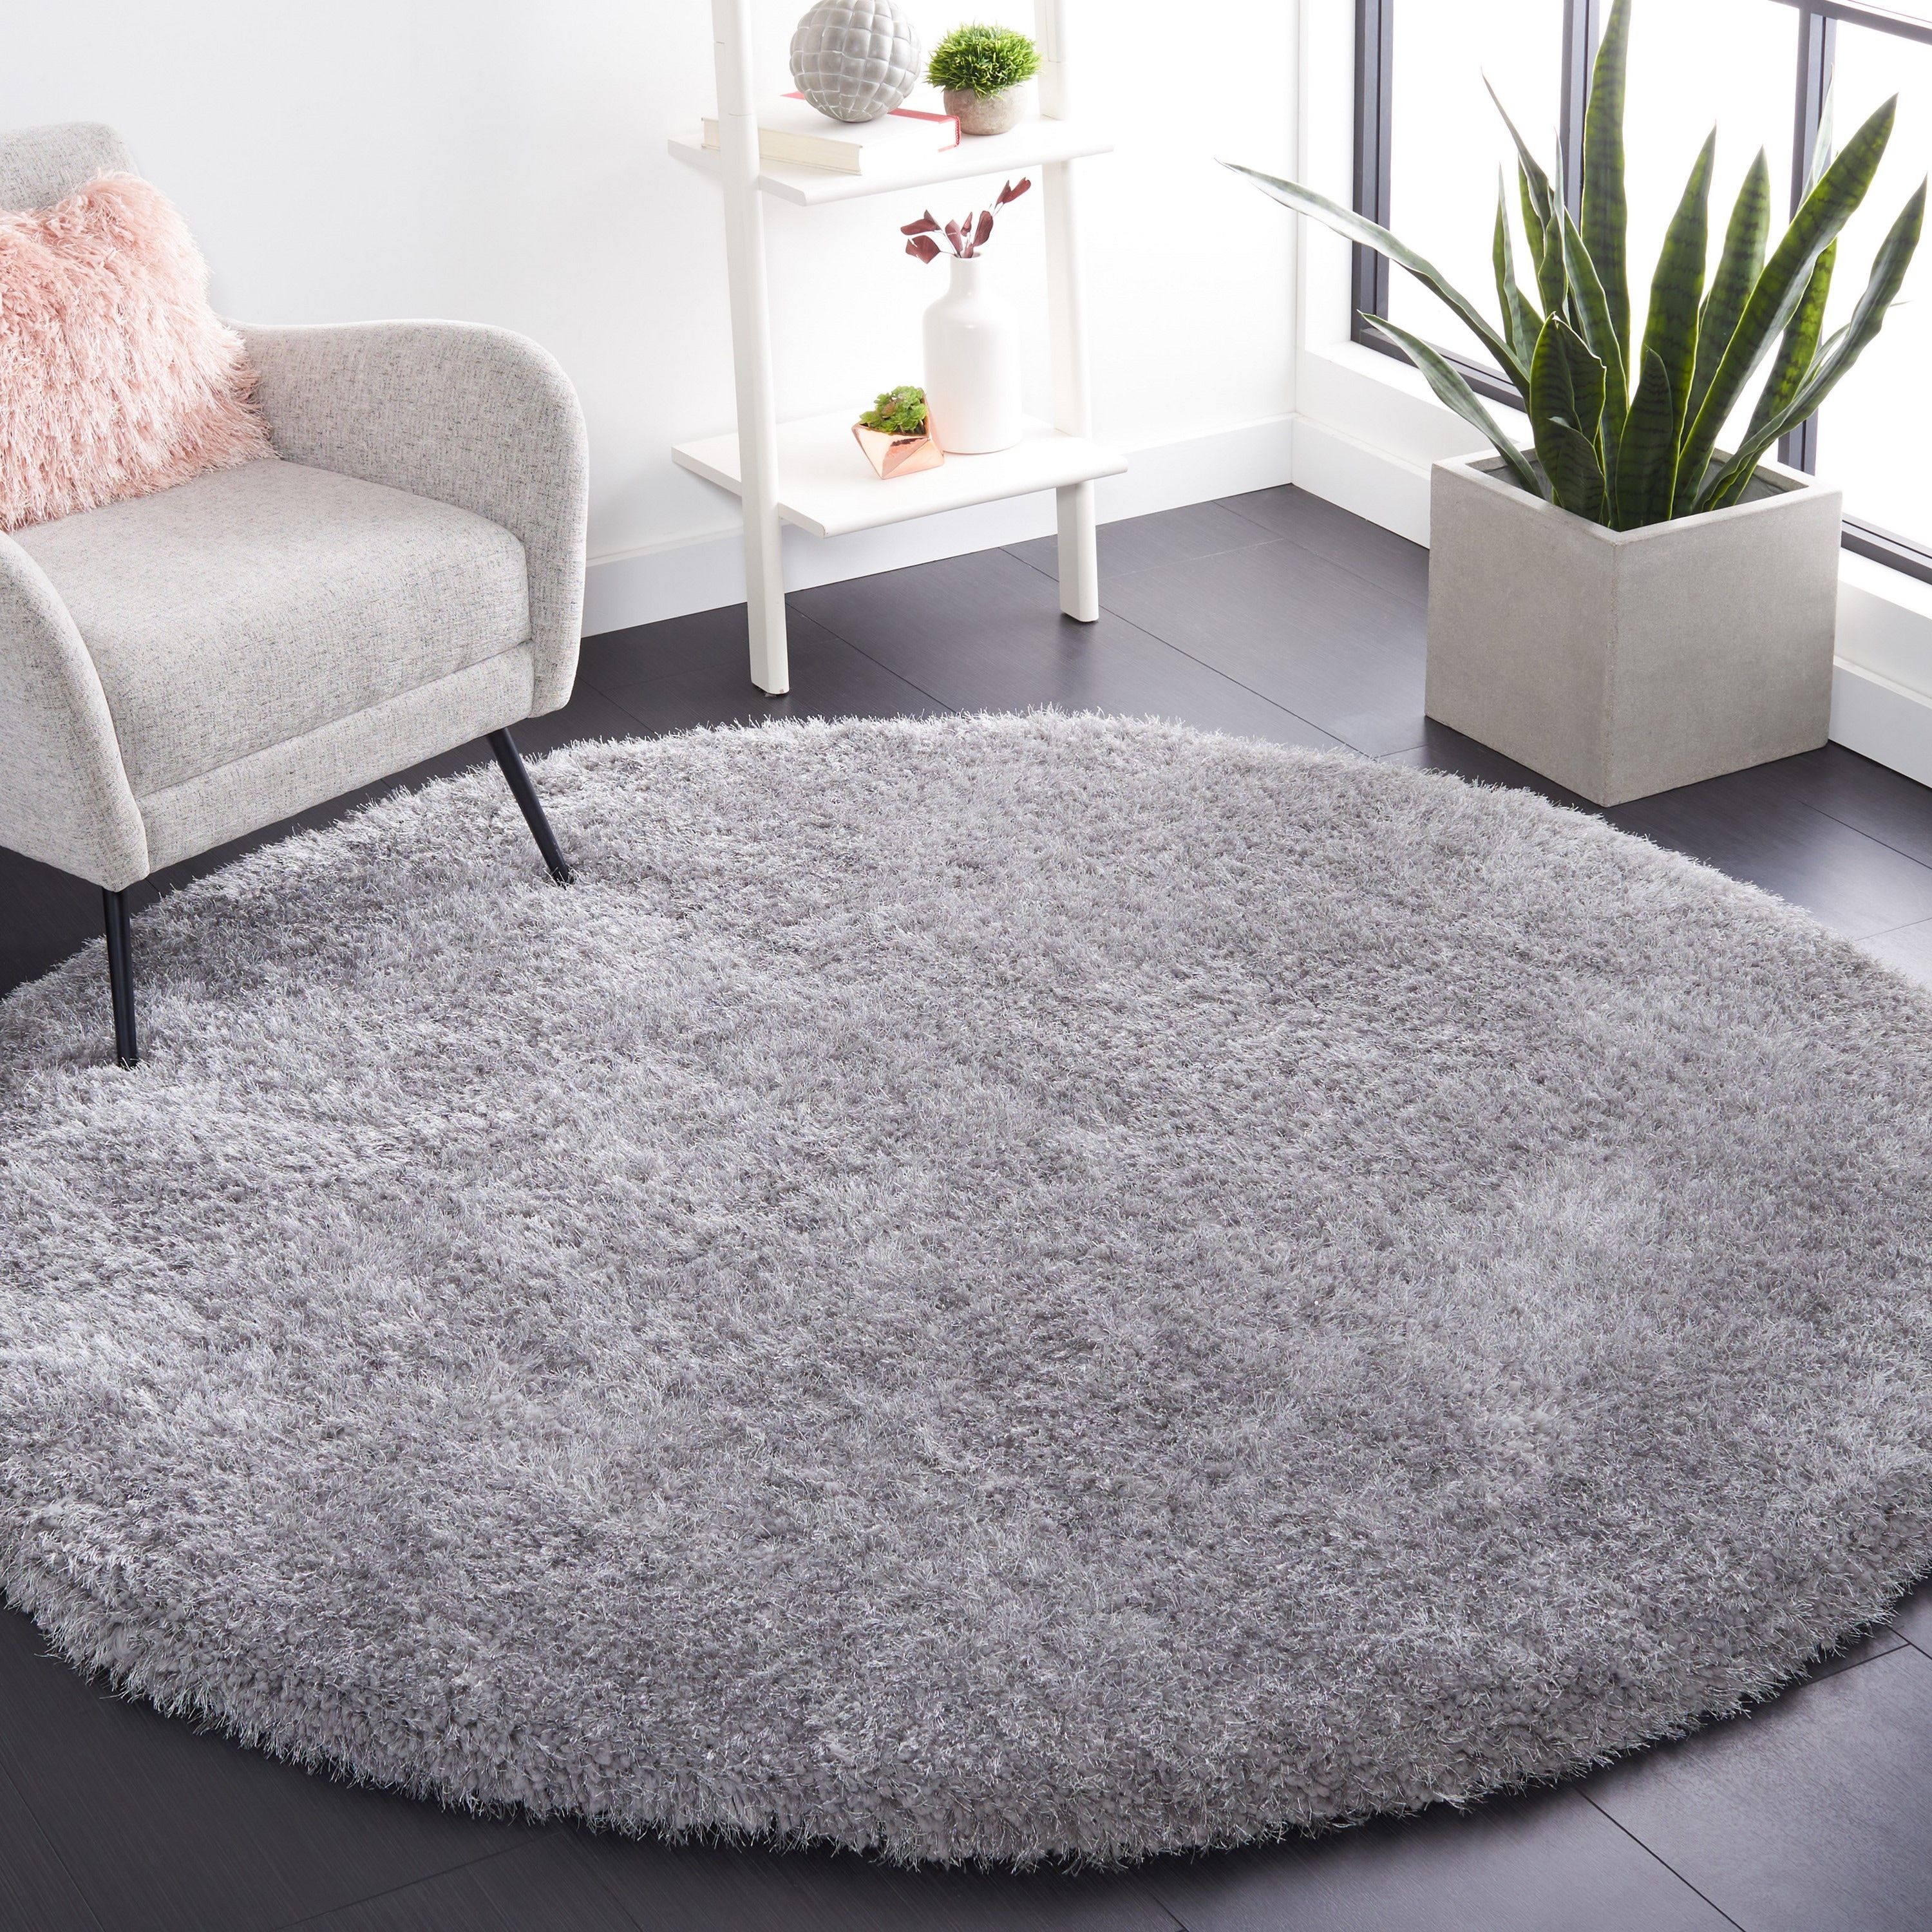 Safavieh Luxe Shag 6 X 6 Gray Round Indoor Solid Area Rug In The Rugs  Department At Lowes With Regard To Shag Oval Rugs (View 7 of 15)